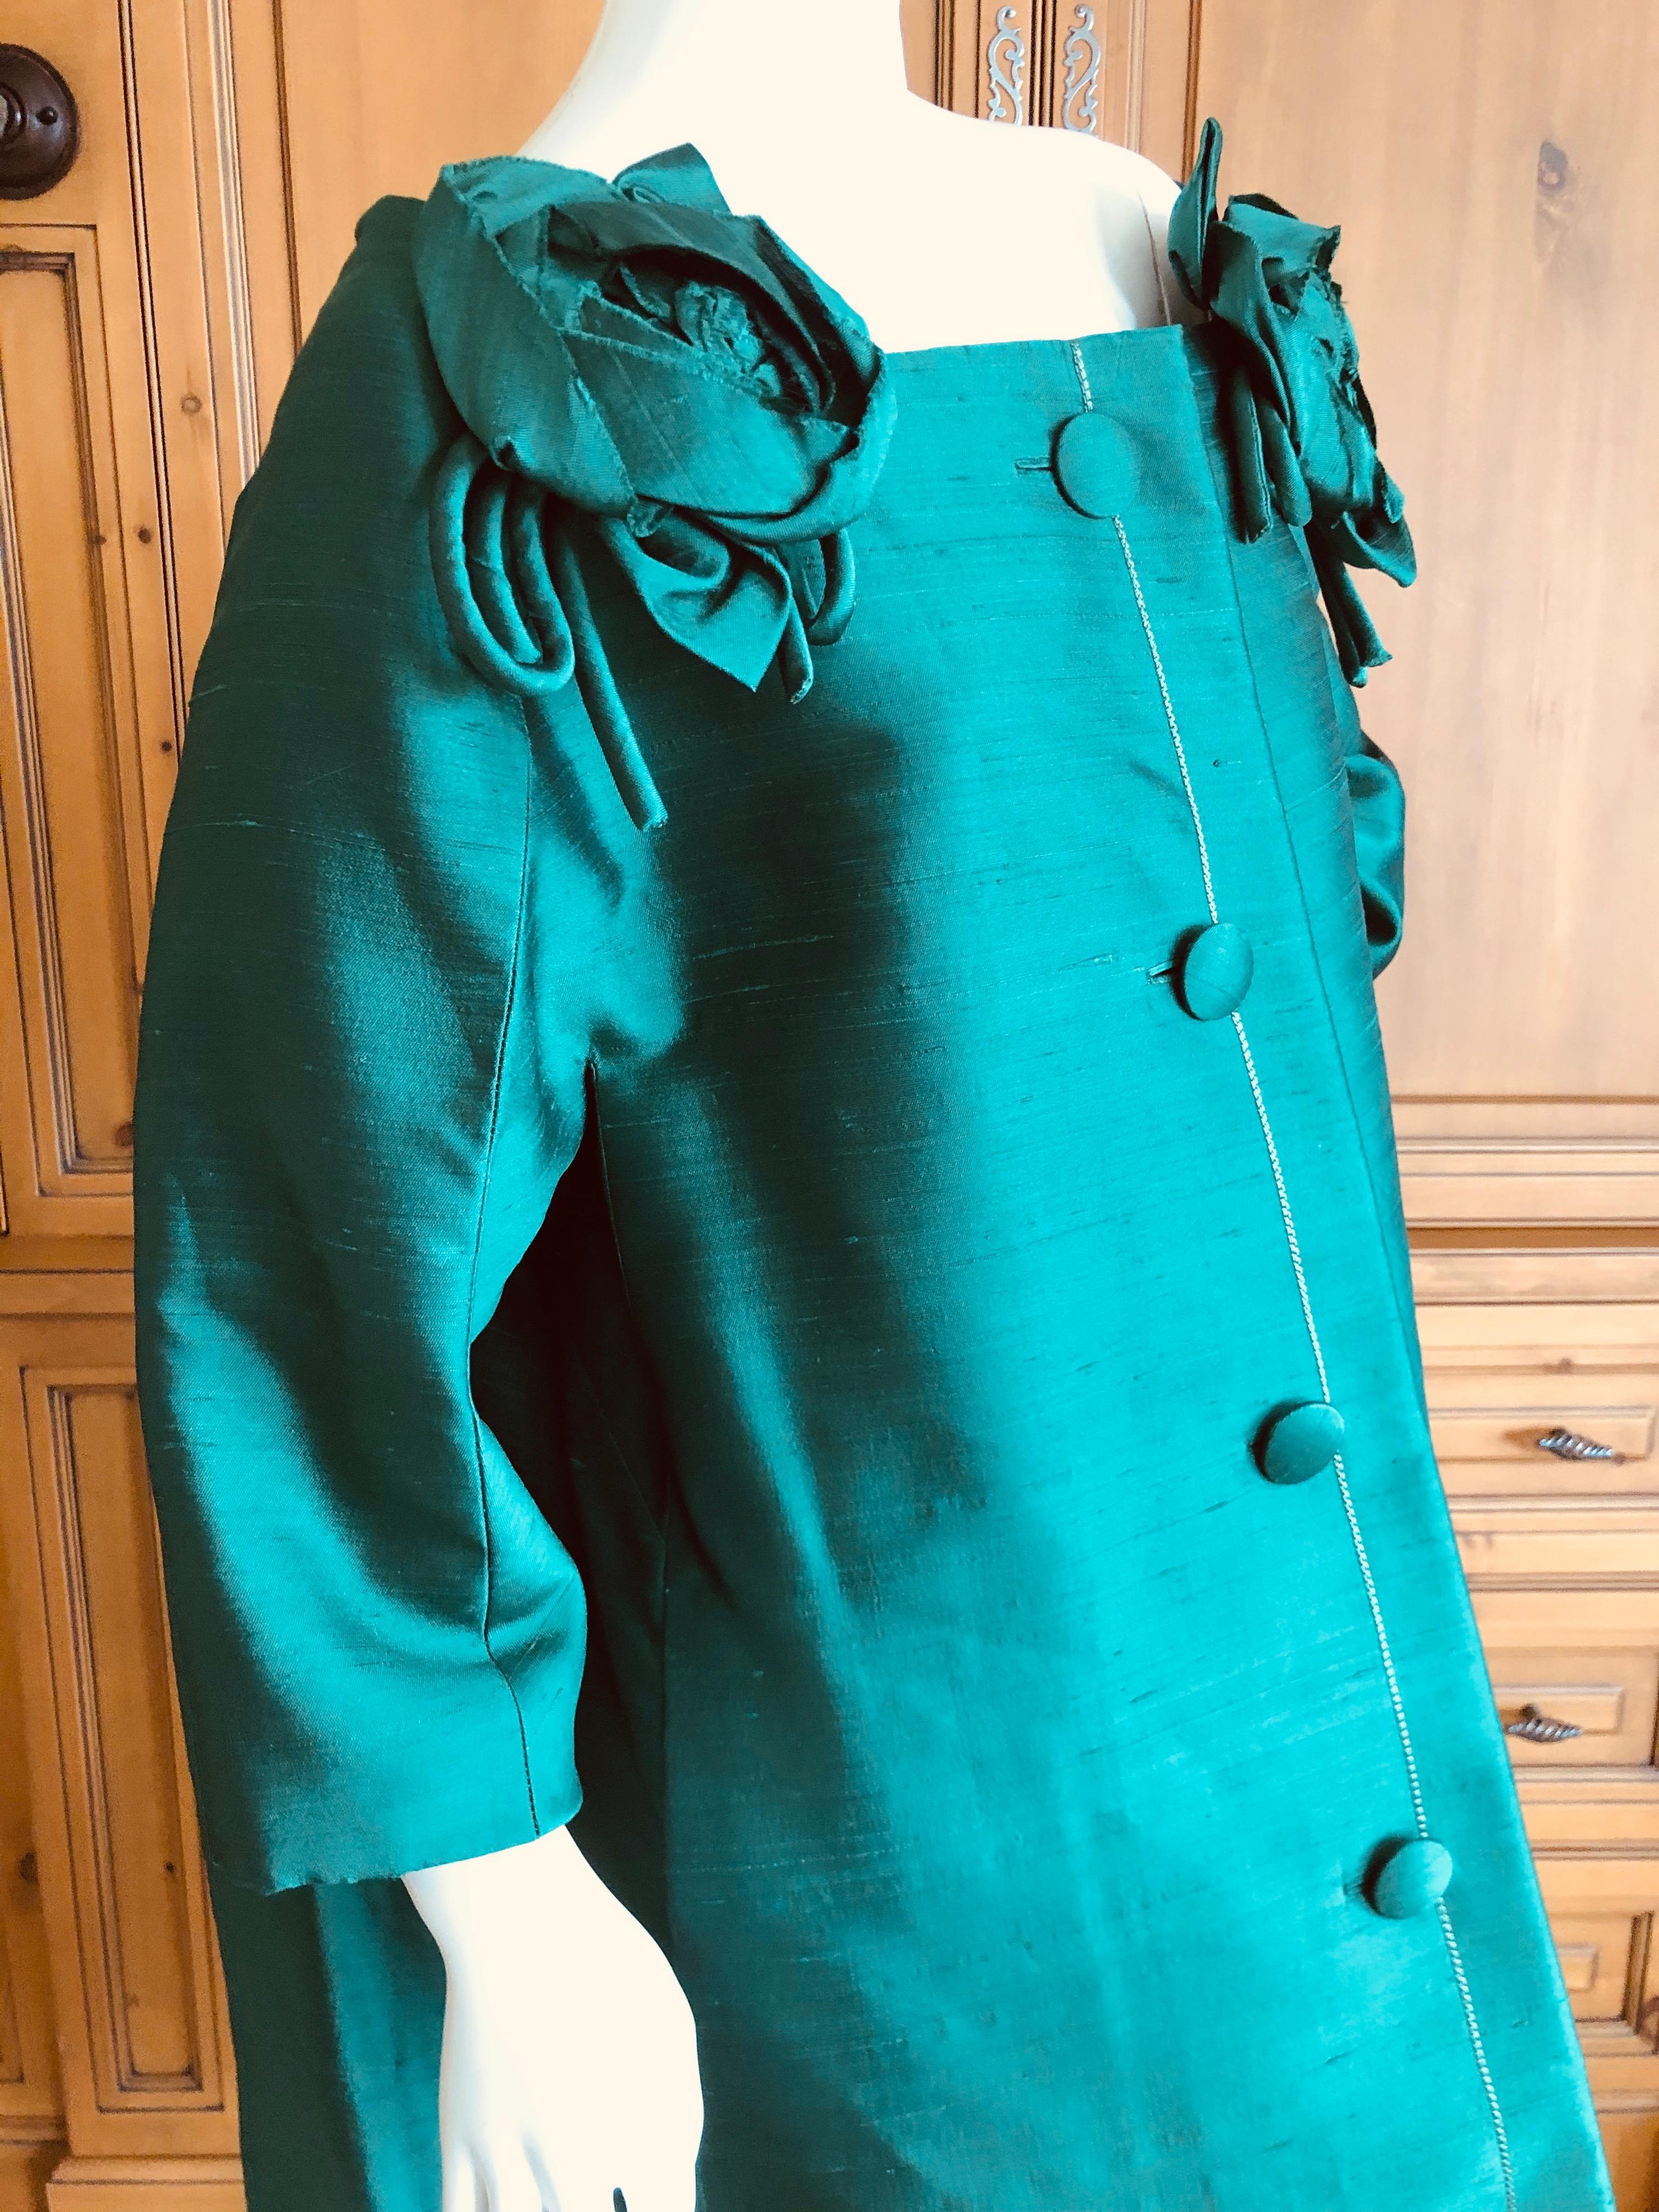 Christian Dior Printemps 1959 Numbered Haute Couture Coat by Yves Saint Laurent For Sale 10